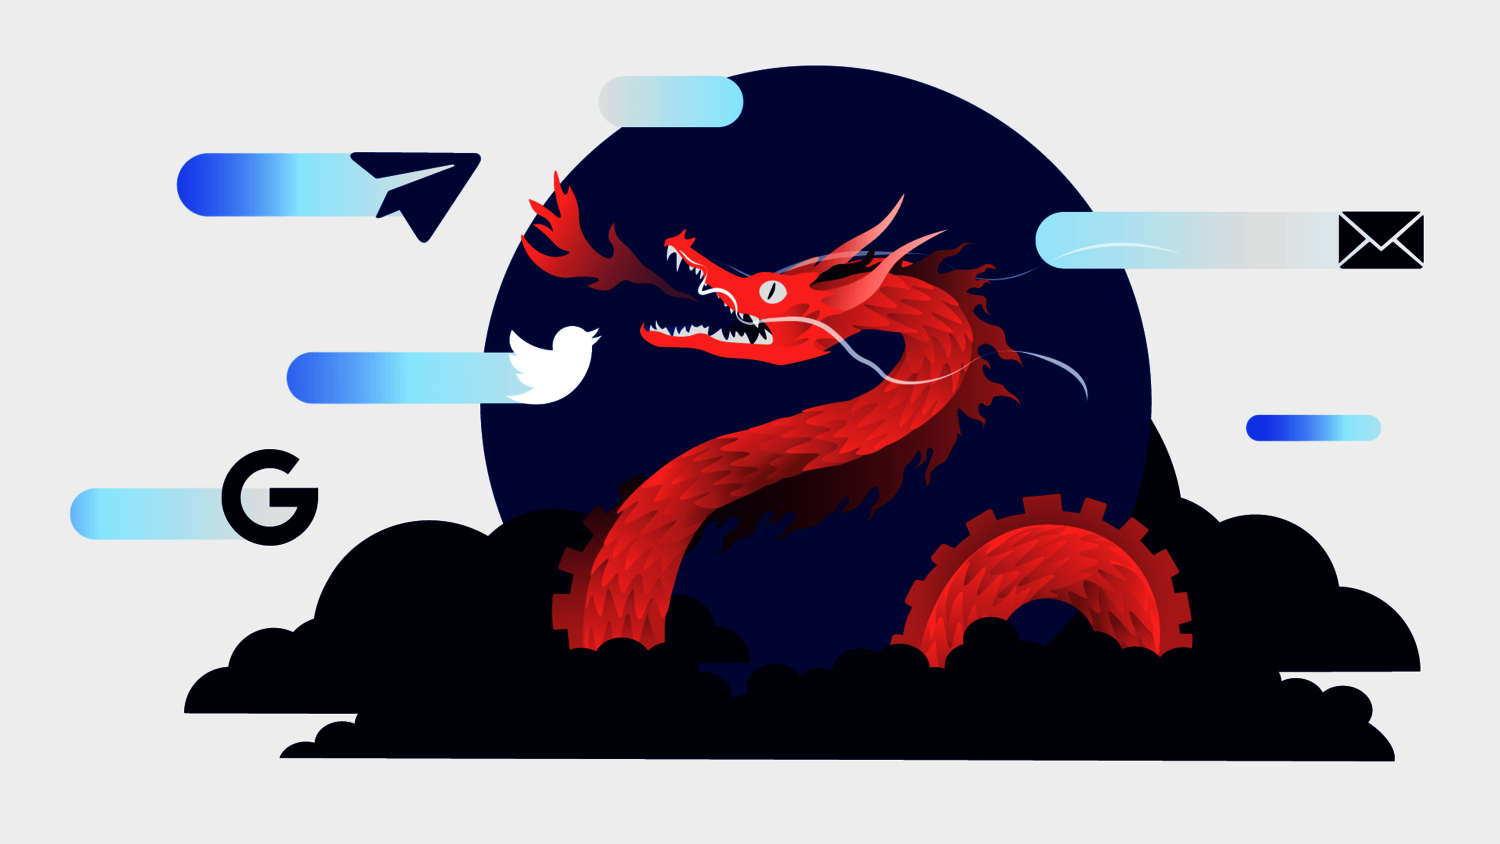 Graphic shows a Chinese dragon surrounded by mail and messenger icons.